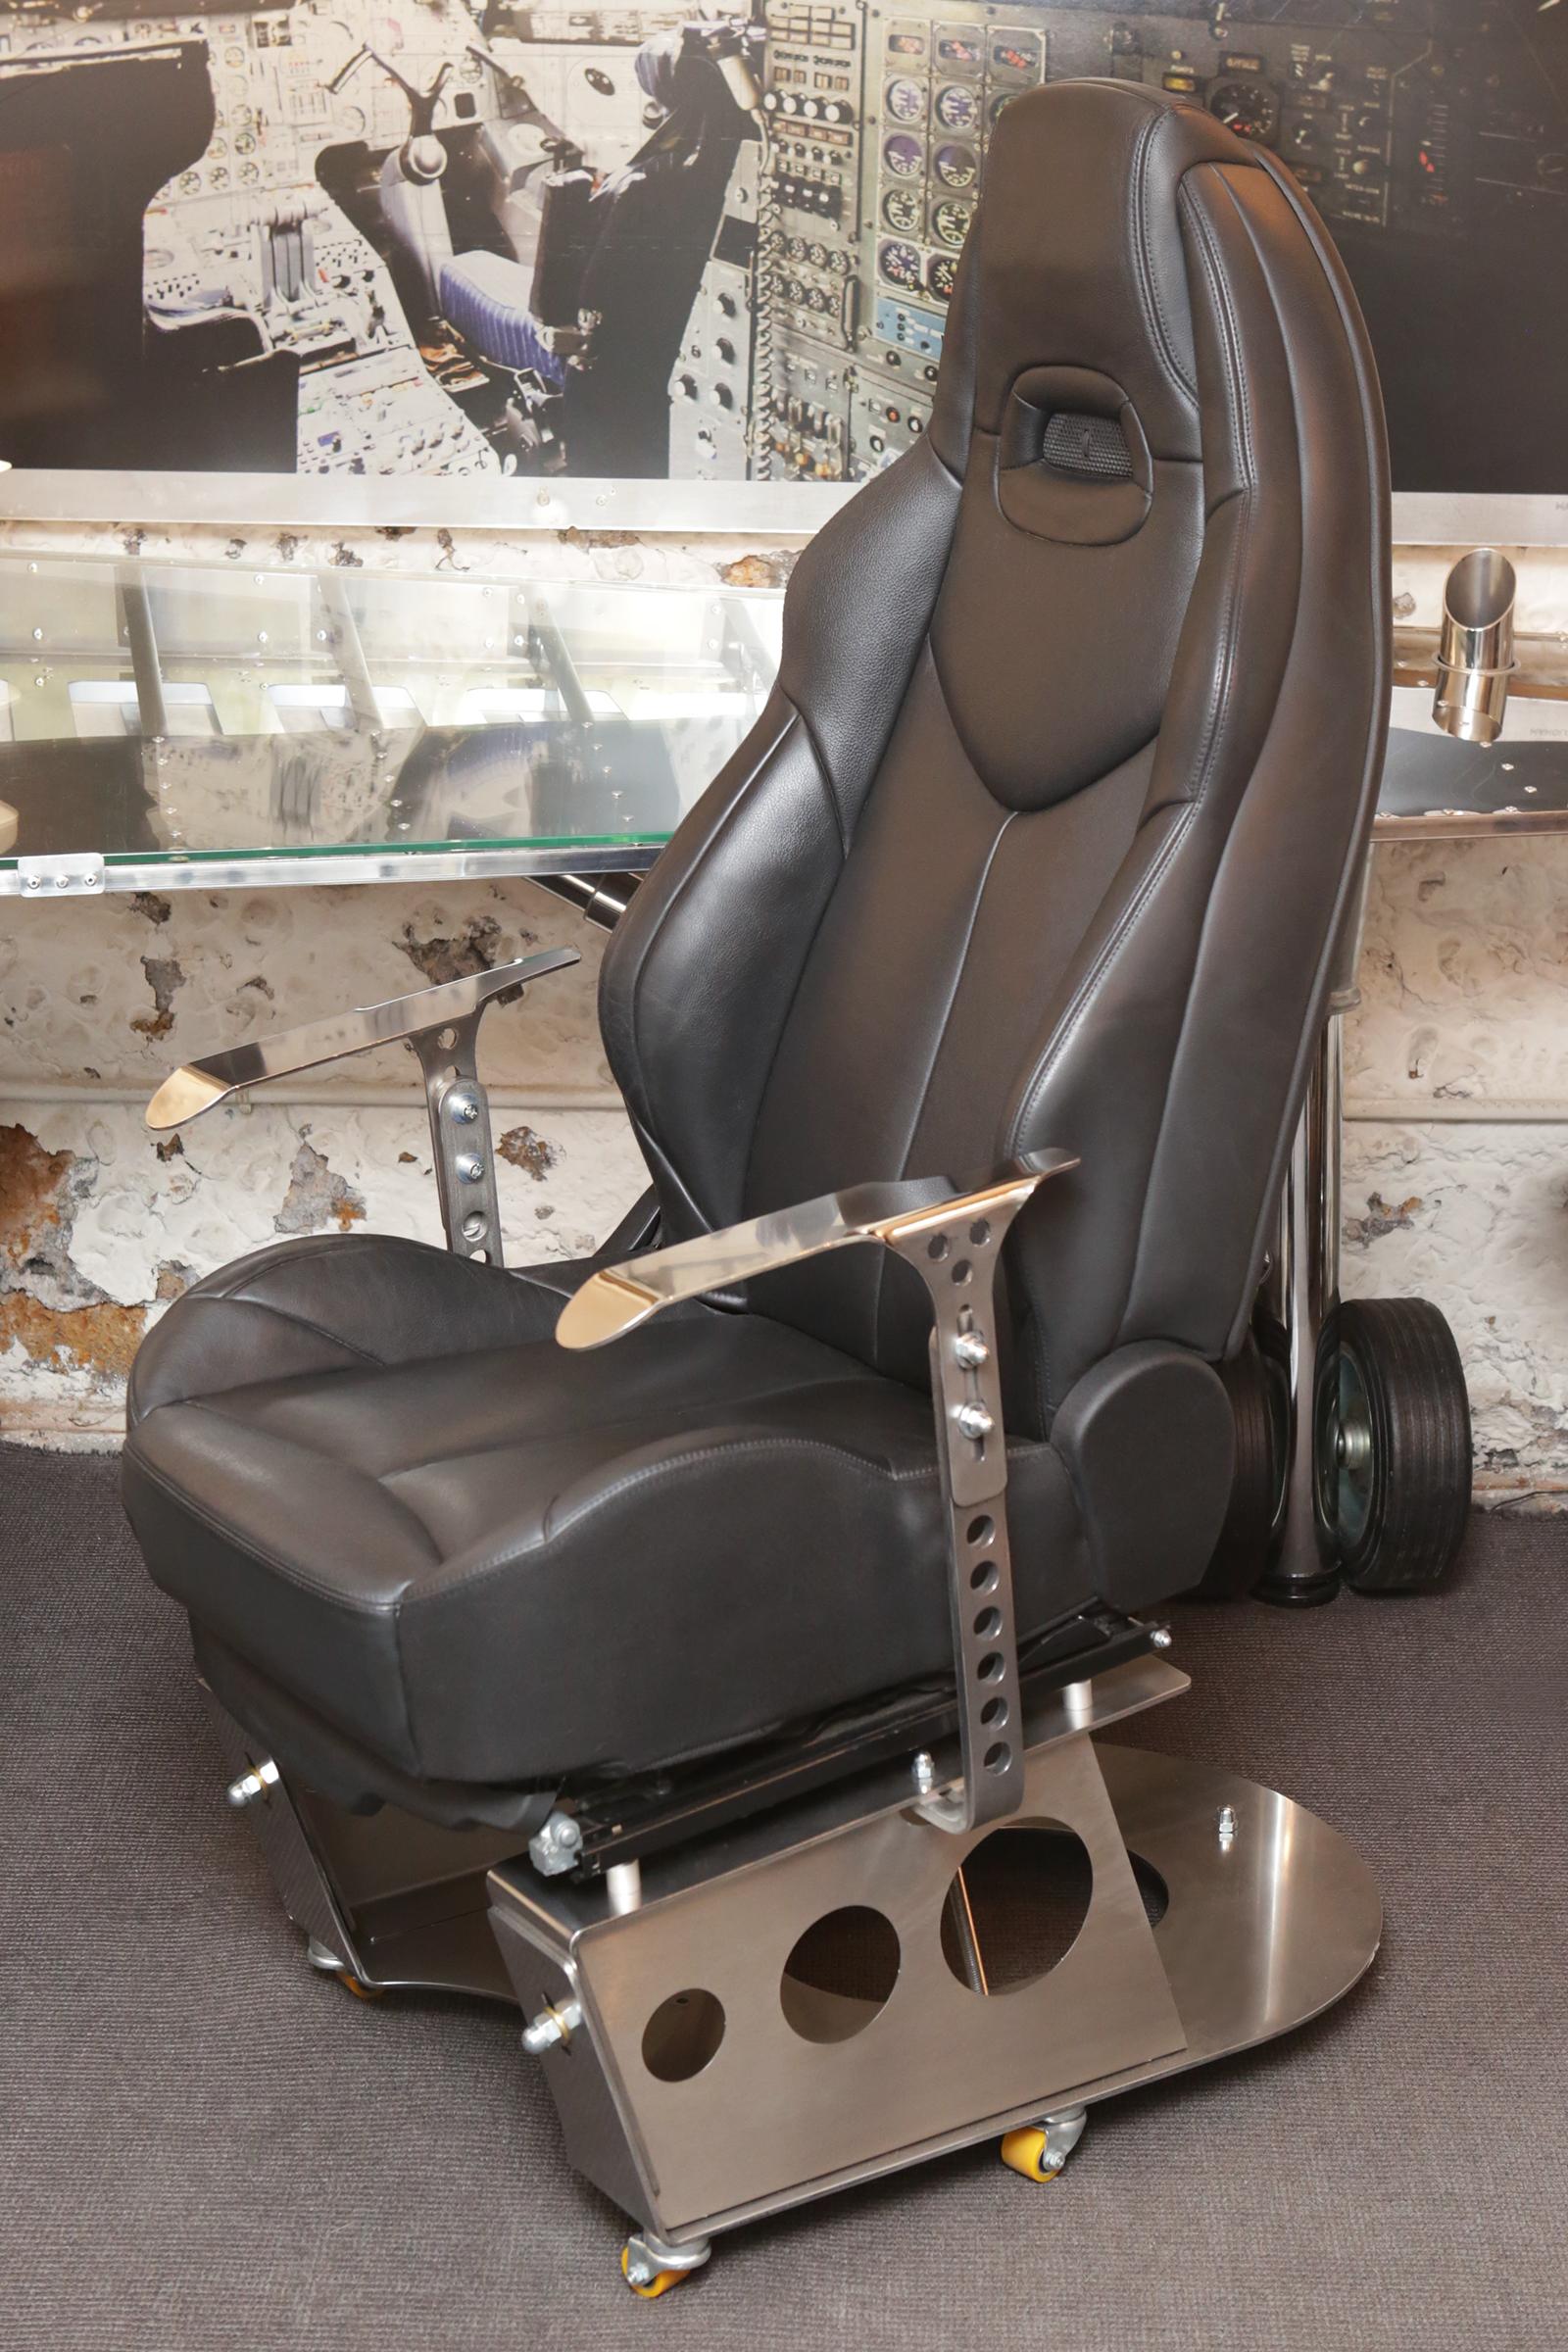 Armchair racing pilot desk office armchair made from a black electric
leather seat of 308 CC coupe cabriolet, mounted on a frame in polished
solid stainless steel. The electric seat adjustments allow you to customize
the seat. The aviation